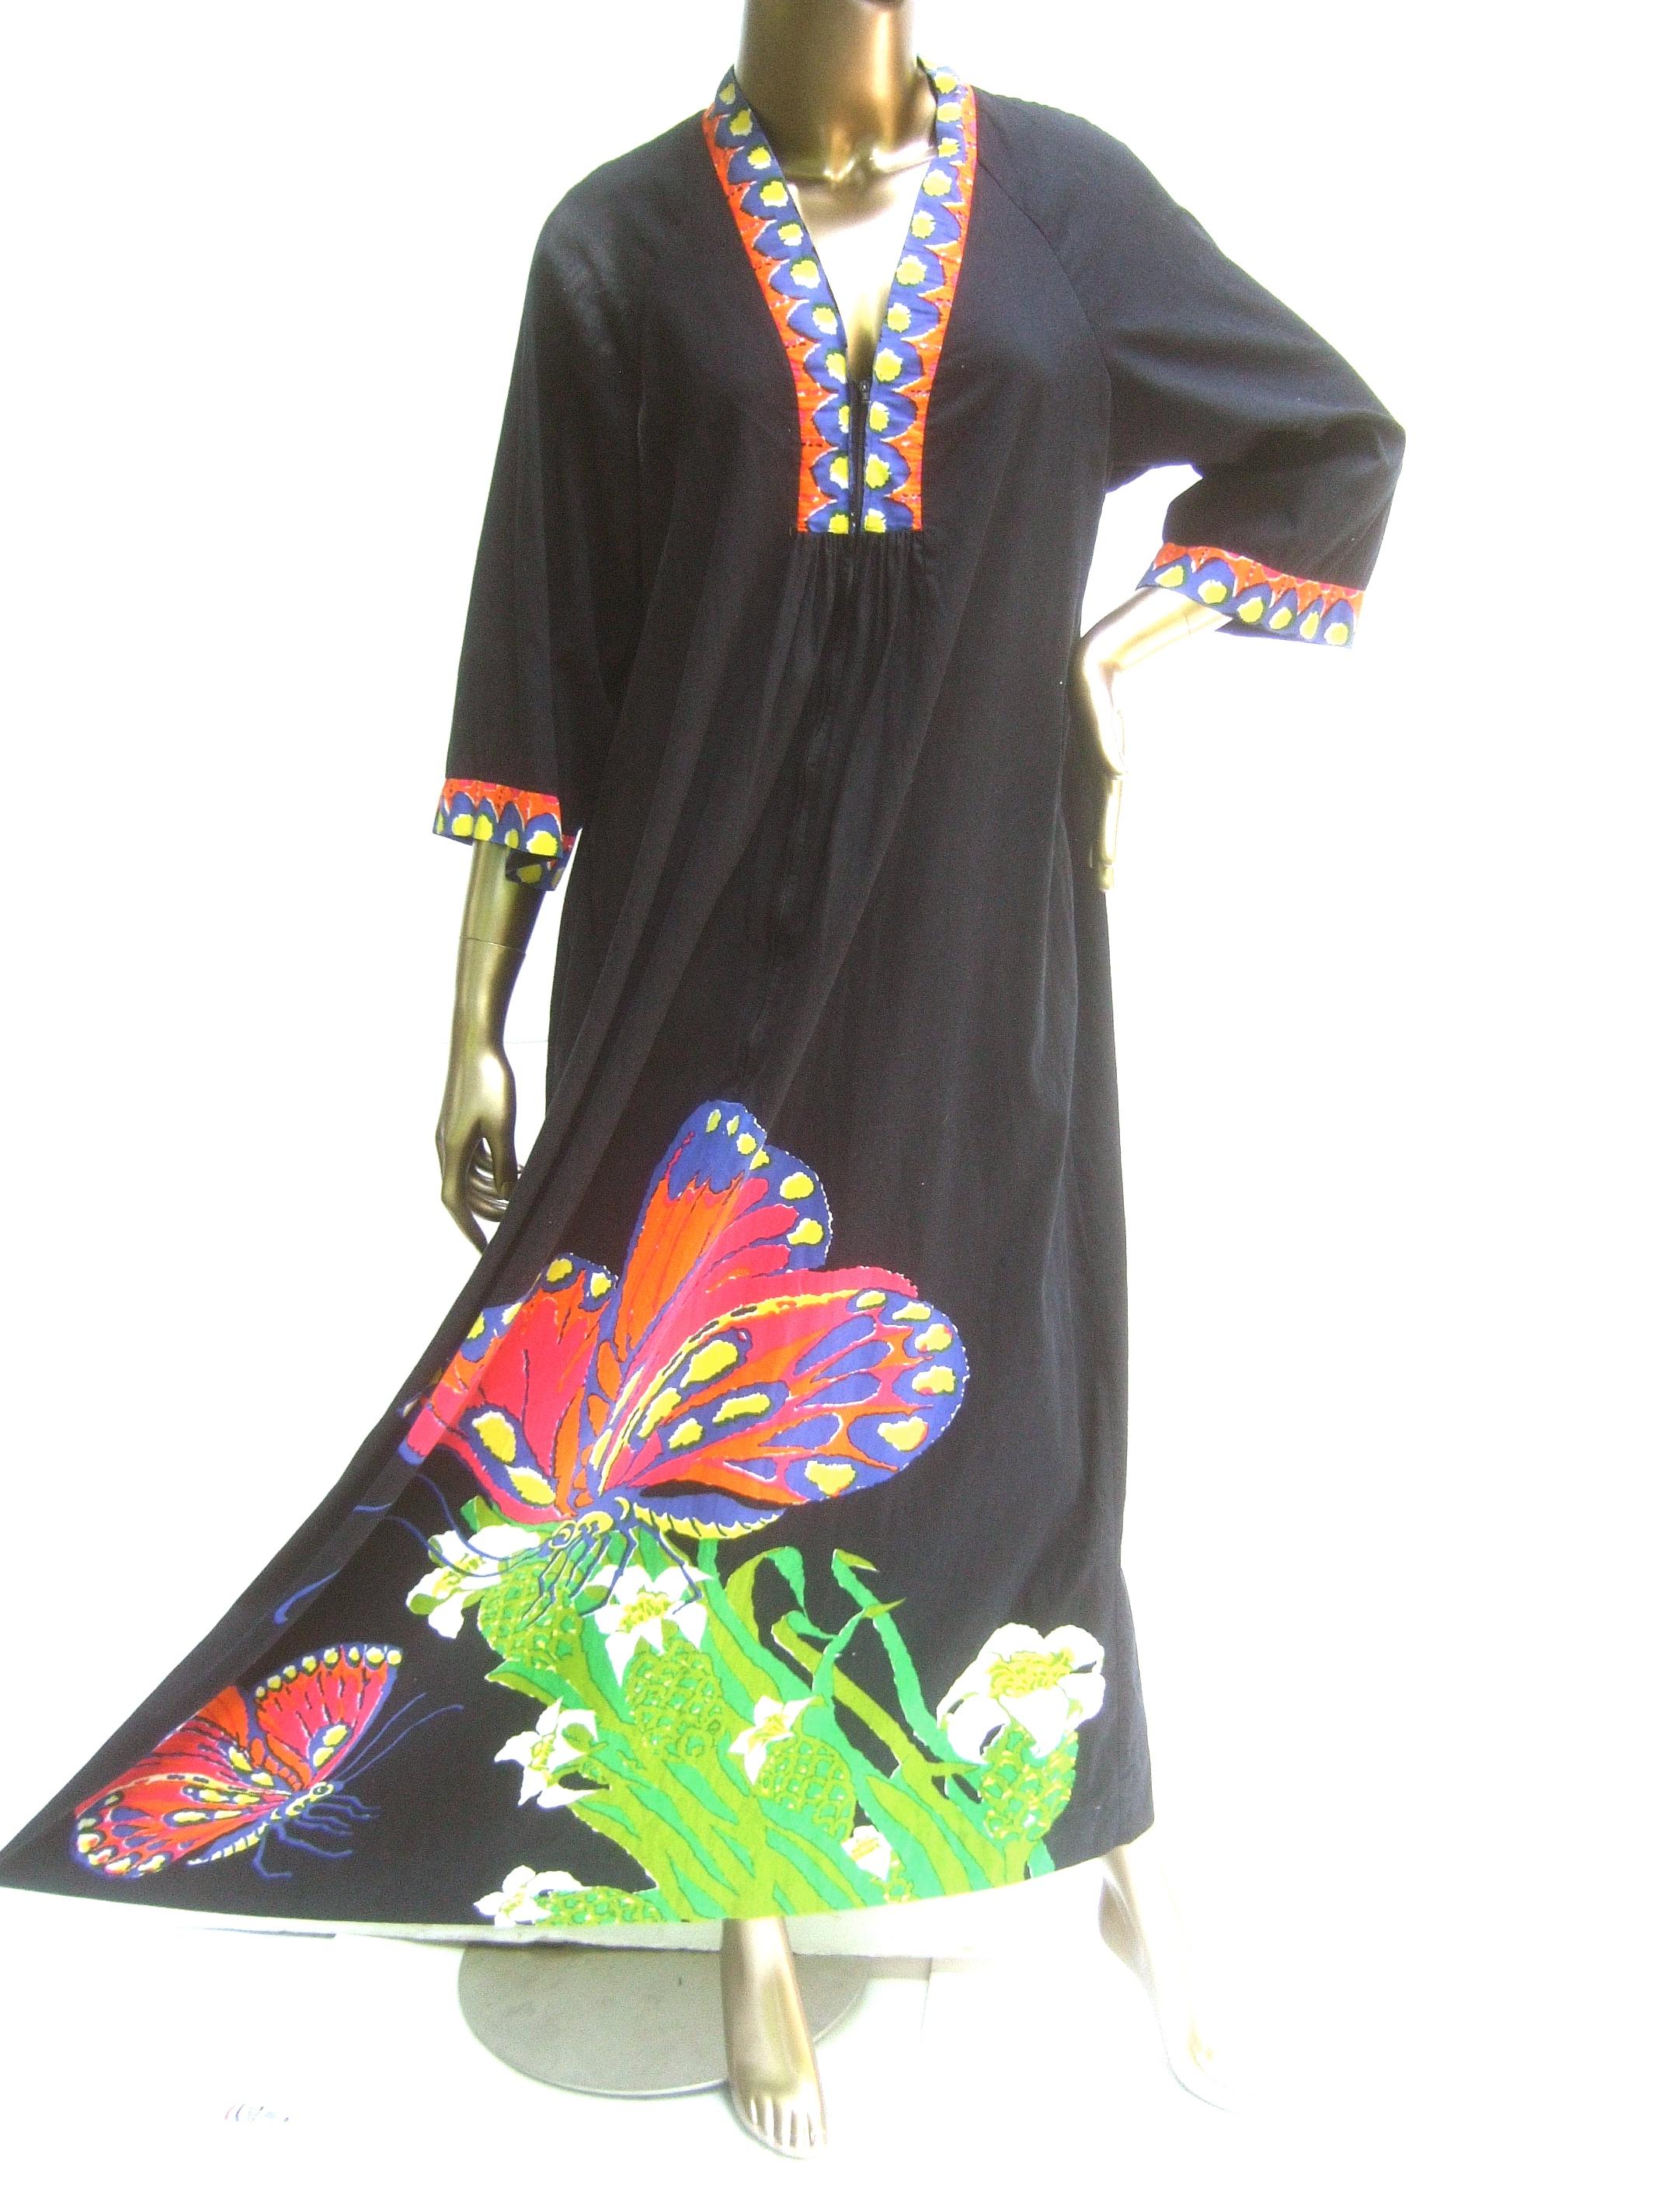 Neiman Marcus Mod cotton butterfly graphic print caftan c 1970s 
The chic retro black cotton caftan is designed with a pair 
of large-scale color block butterflies on both the lower
front section and is replicated on the back side 

The neckline and